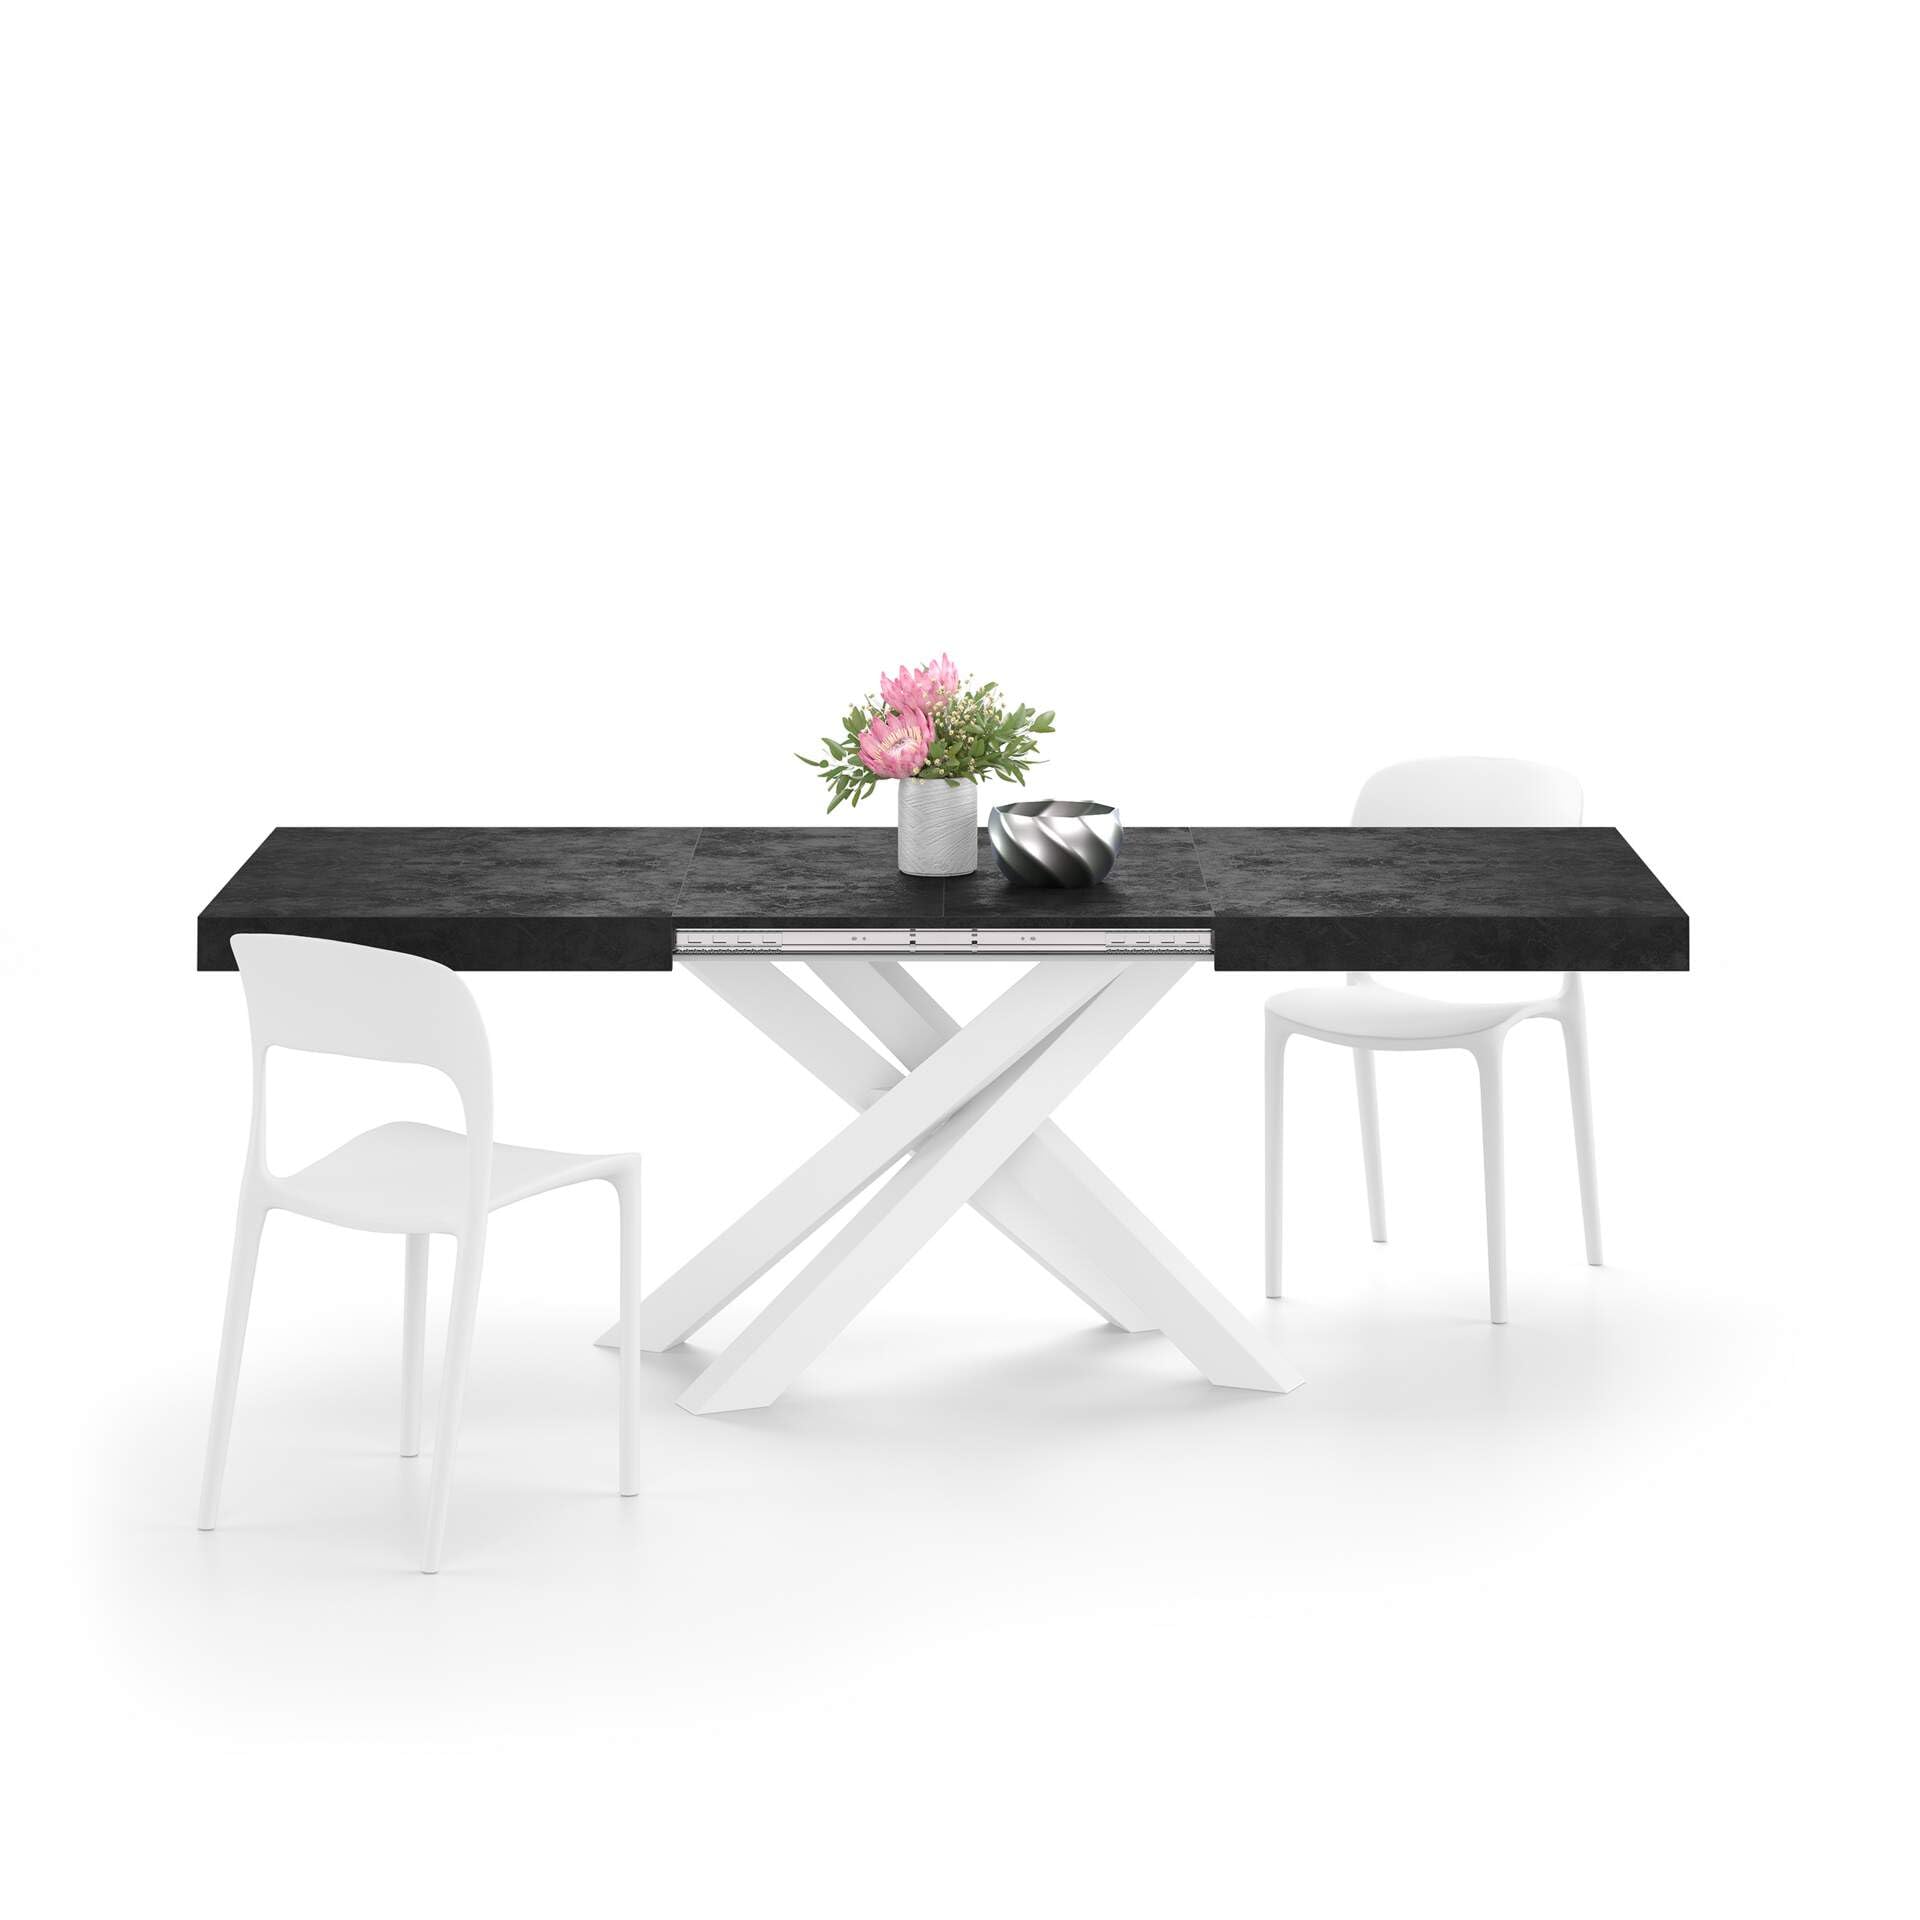 Mobili Fiver, Emma 55.1 in, Extendable Dining Table, Concrete Black with  White Crossed Legs, Made in Italy